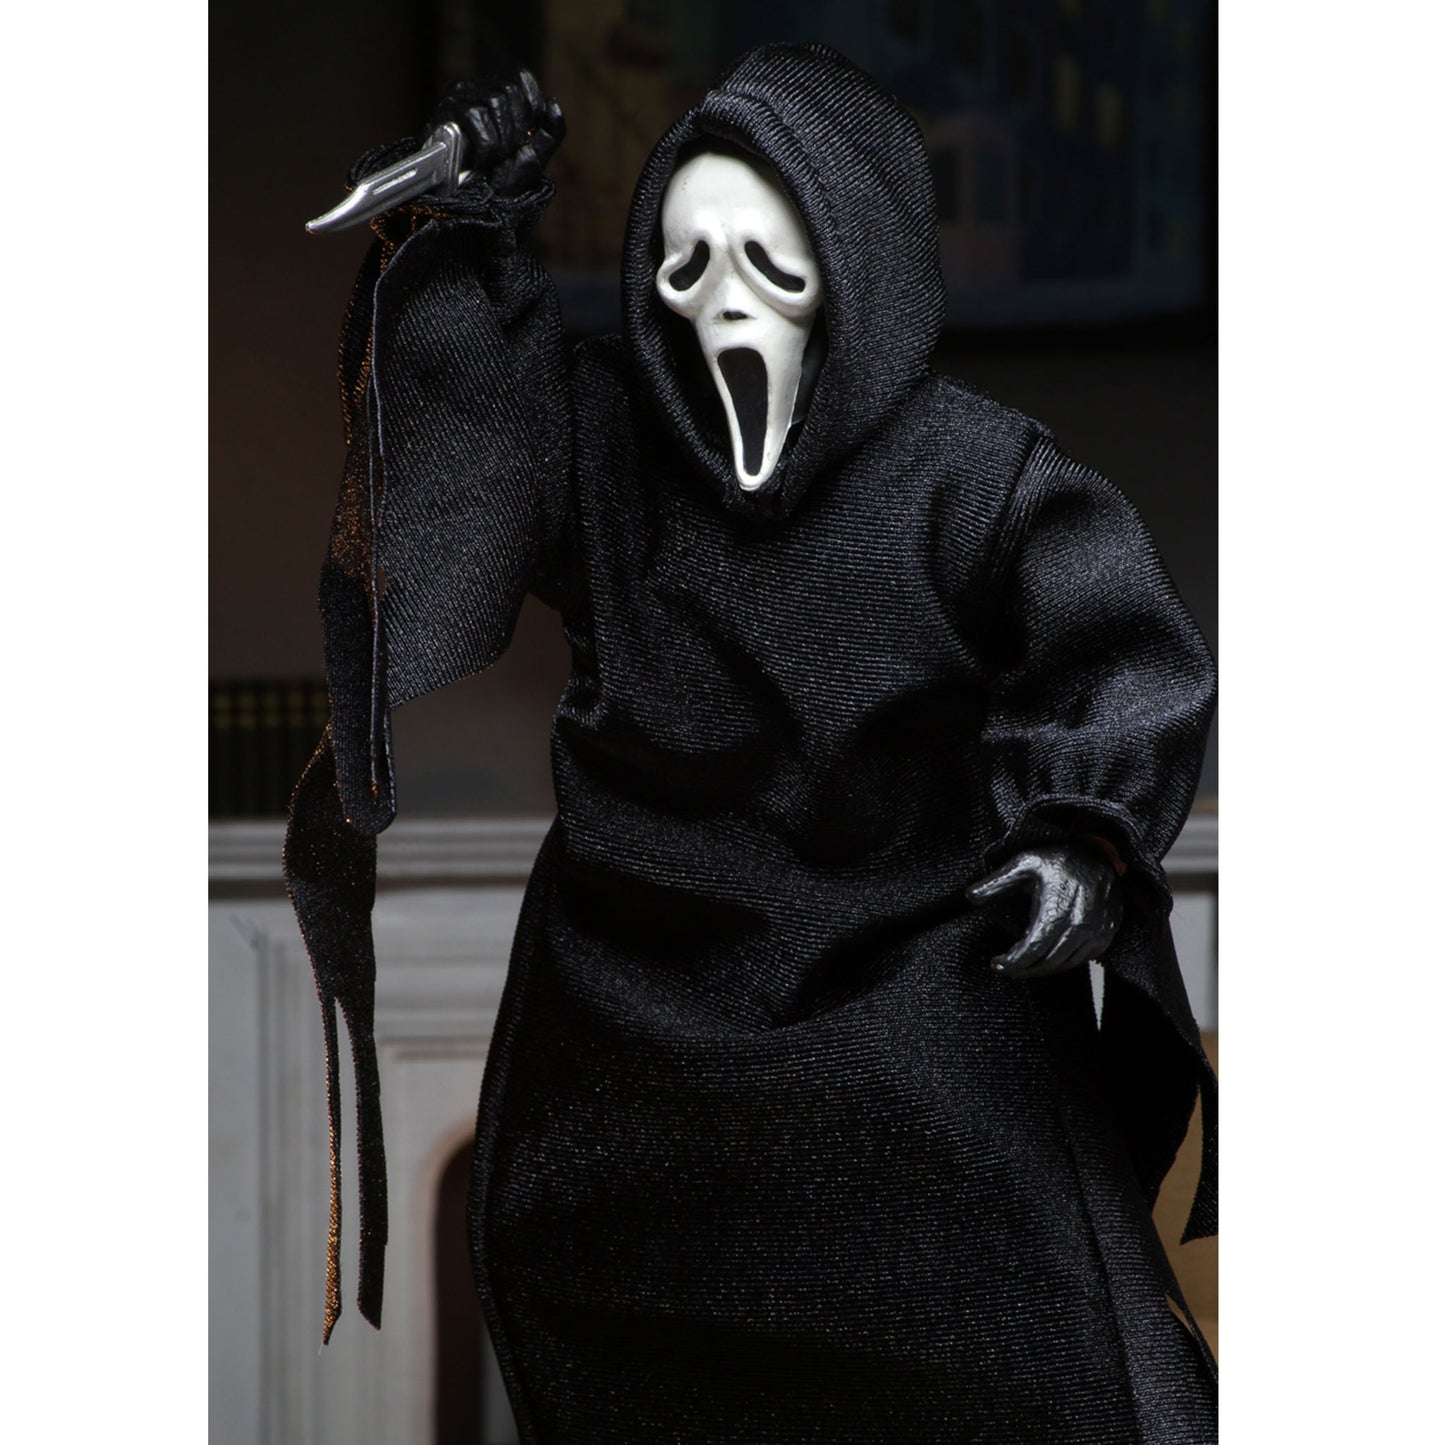 Load image into Gallery viewer, Ghostface (Scream) NECA Clothed Action Figure
